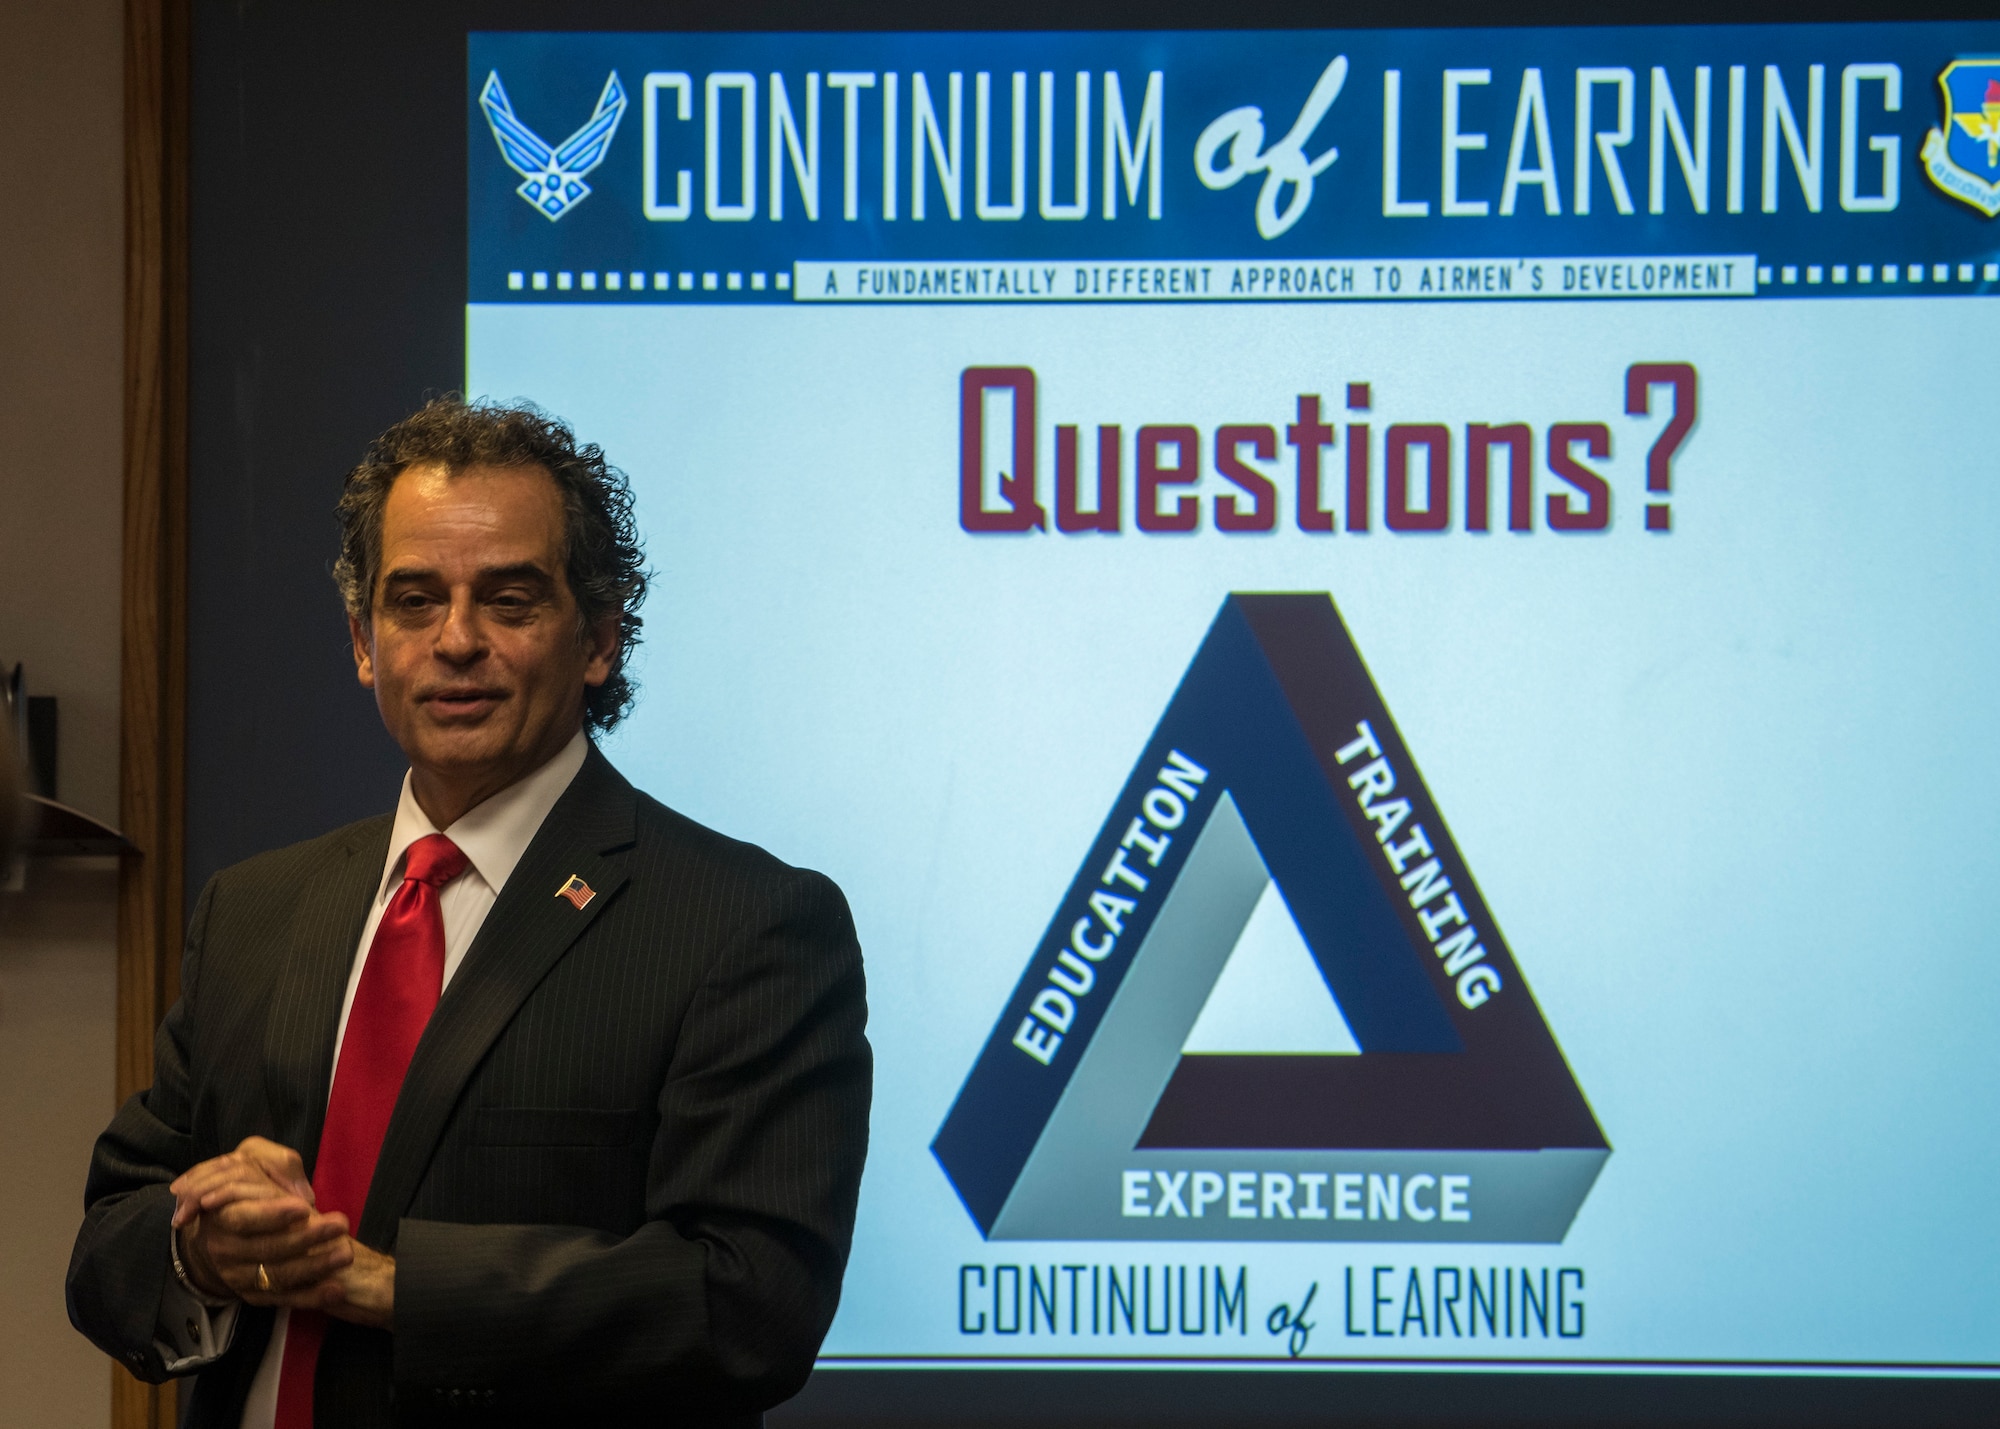 Masoud Rasti, Headquarters Air Education and Training Command Force Development expert briefs 58th Special Operations Wing senior leaders about the Continuum of Learning at Kirtland Air Force Base, N.M., April 25. The Continuum of Learning initiative is a shift to better focus how Airmen learn by integrating education, training and experience in ways that allow them to learn anytime, anywhere throughout their careers. The end goal is to create a culture of lifelong learning. (U.S. Air Force photo by Staff Sgt. J.D. Strong II)